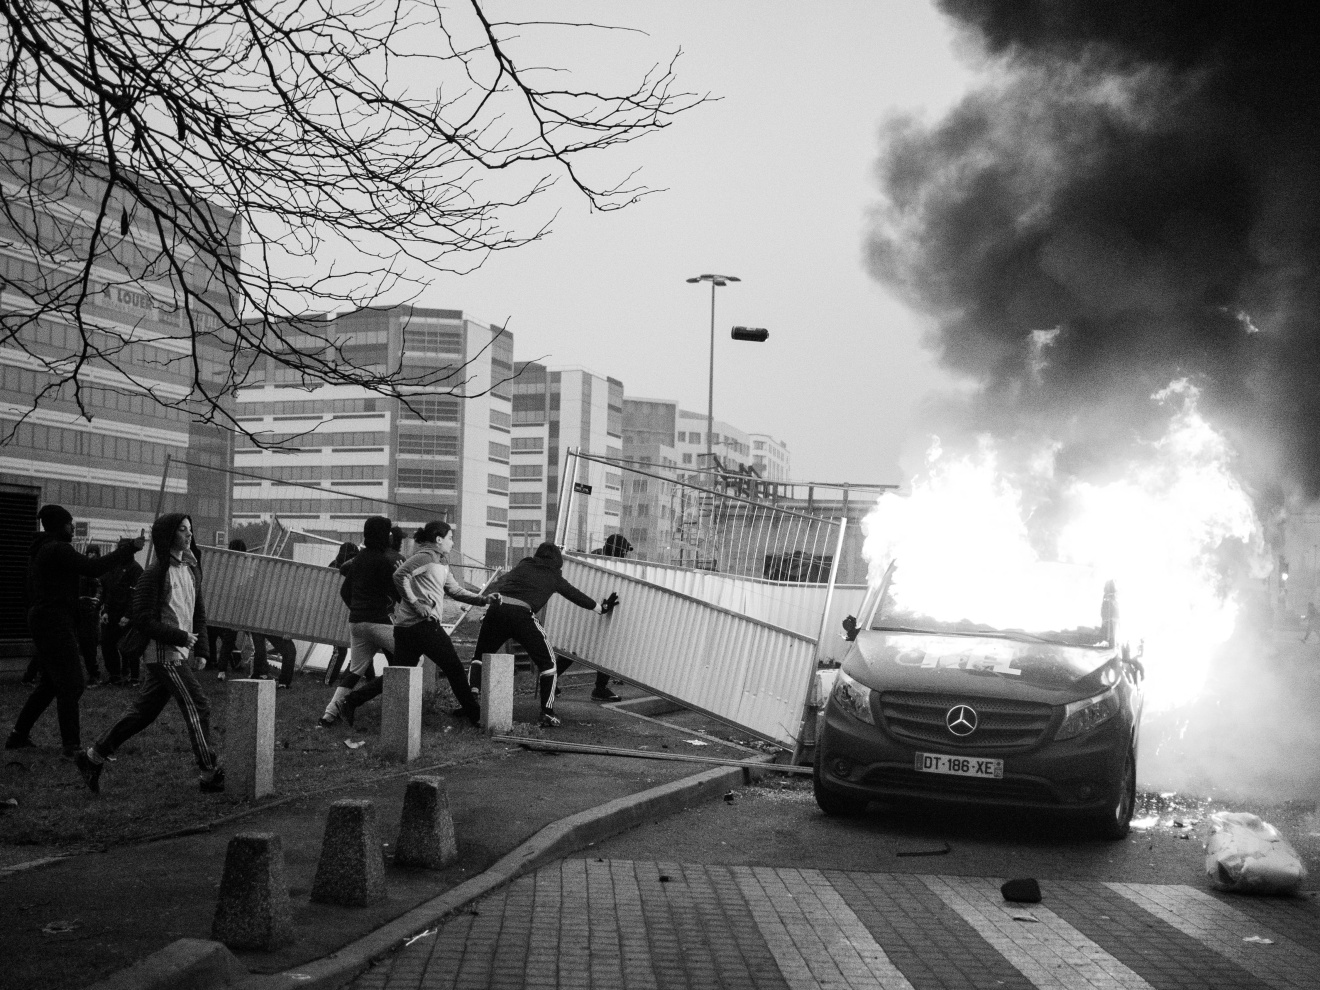 France;Paris;2017

Clashes at a demonstration in Bobigny.